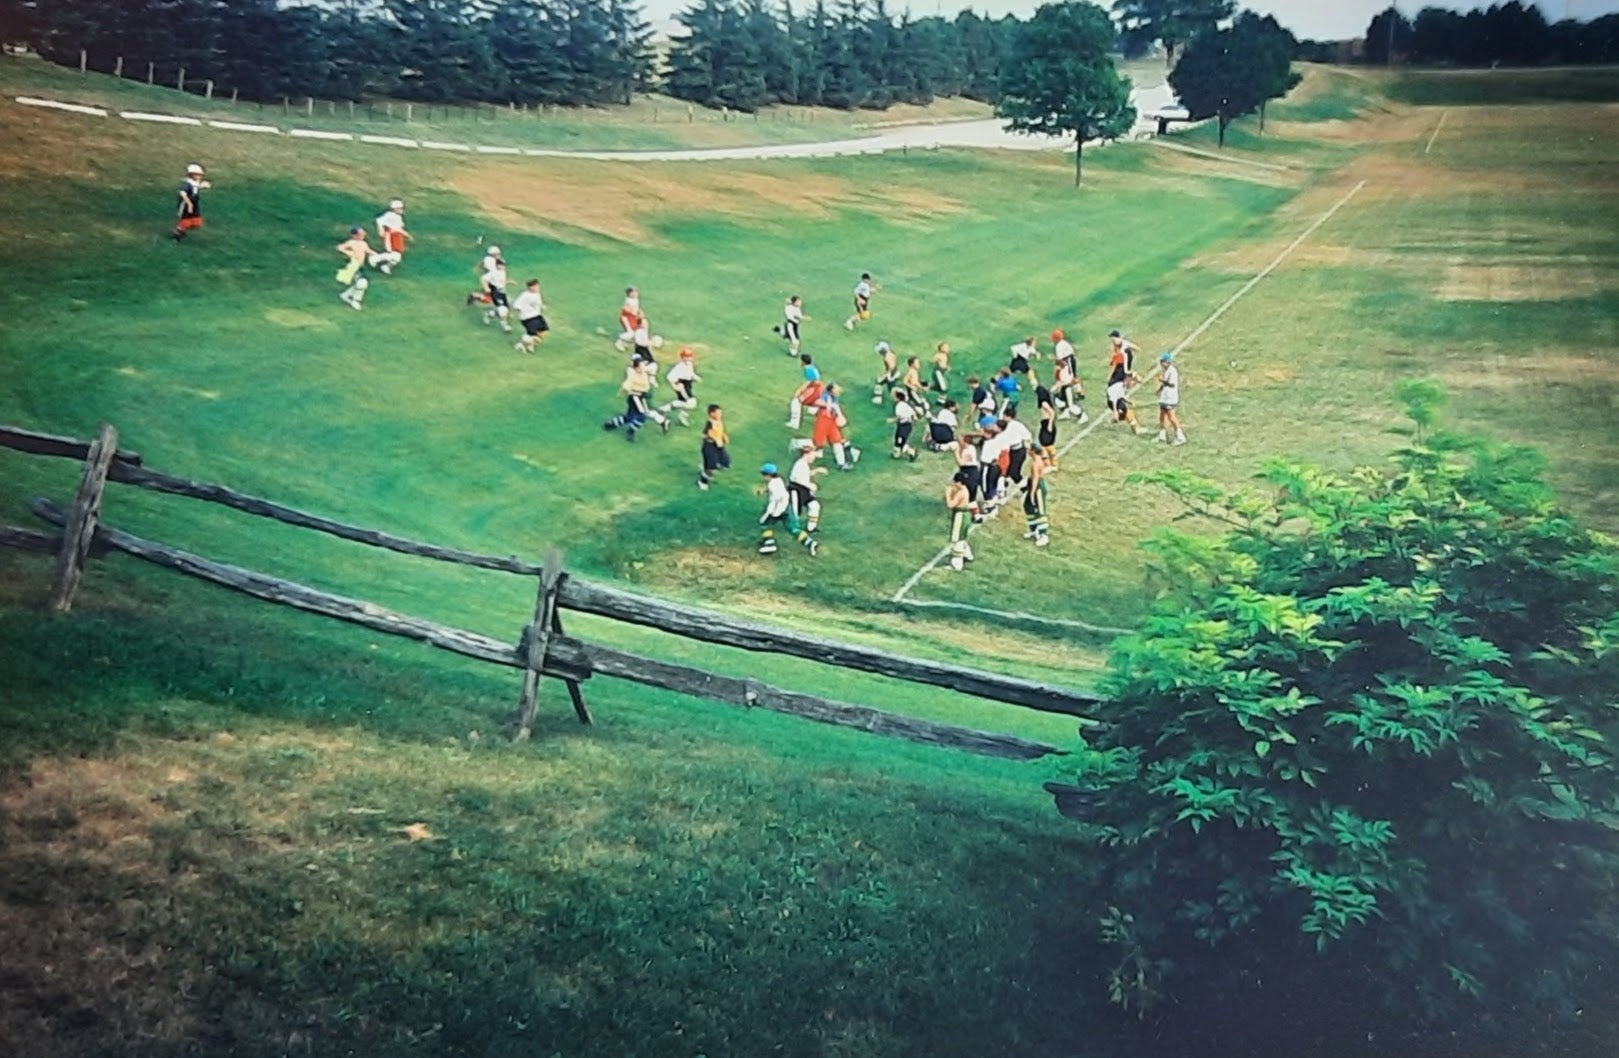 A group of kids in sports uniform run up and down the hill